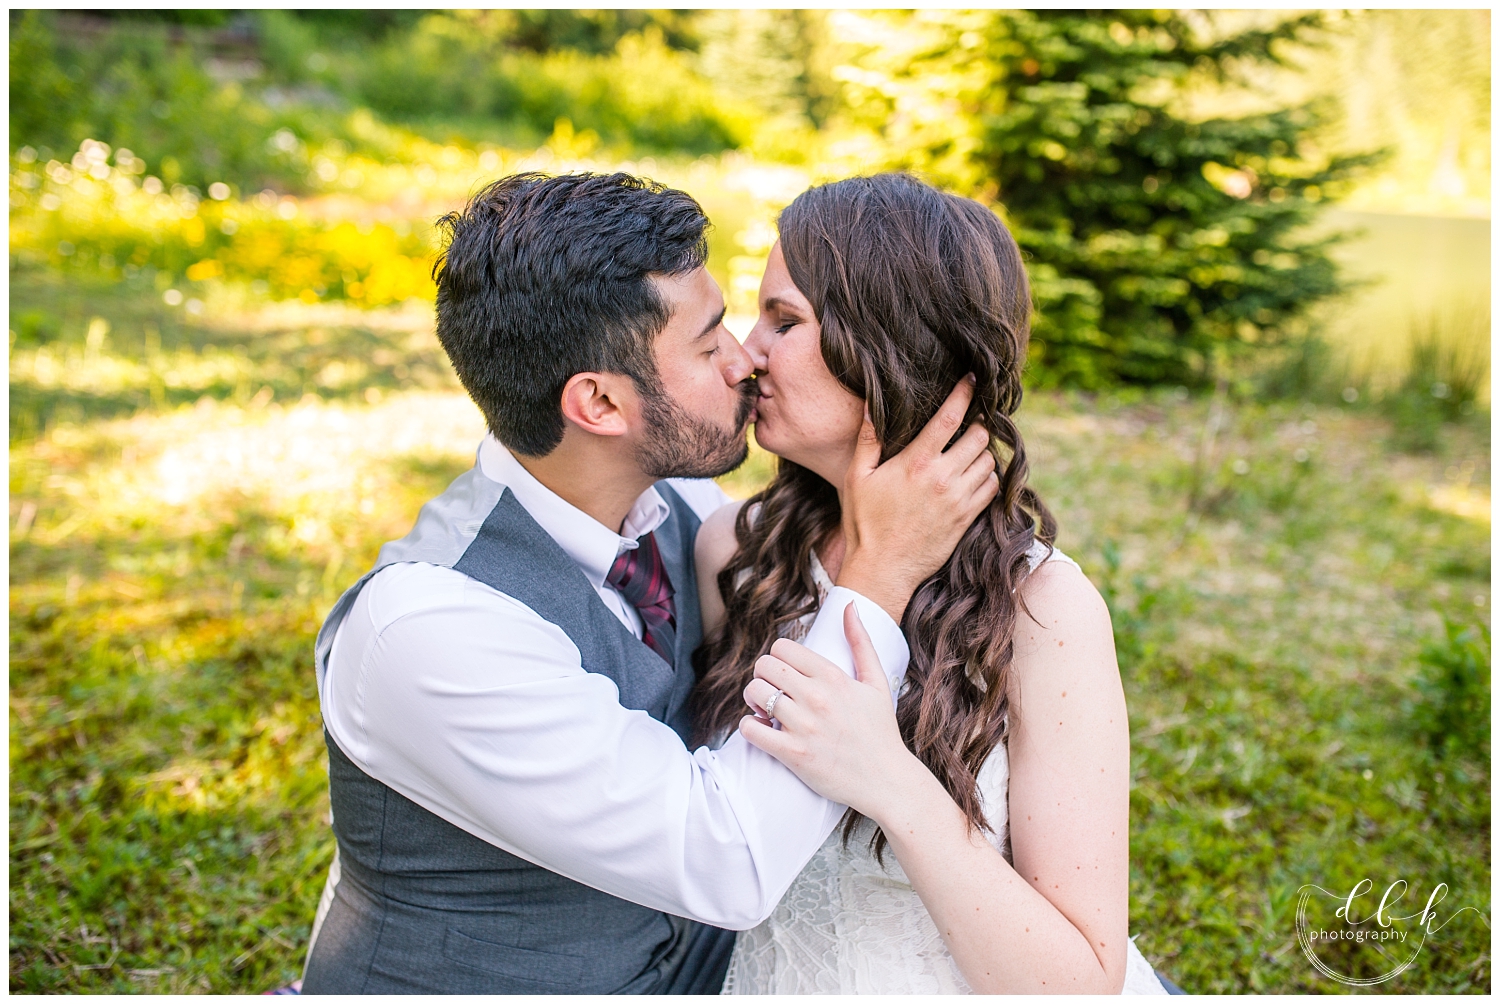 Gold Creek Pond summer engagement portraits by DBK Photography | Seattle wedding photographer